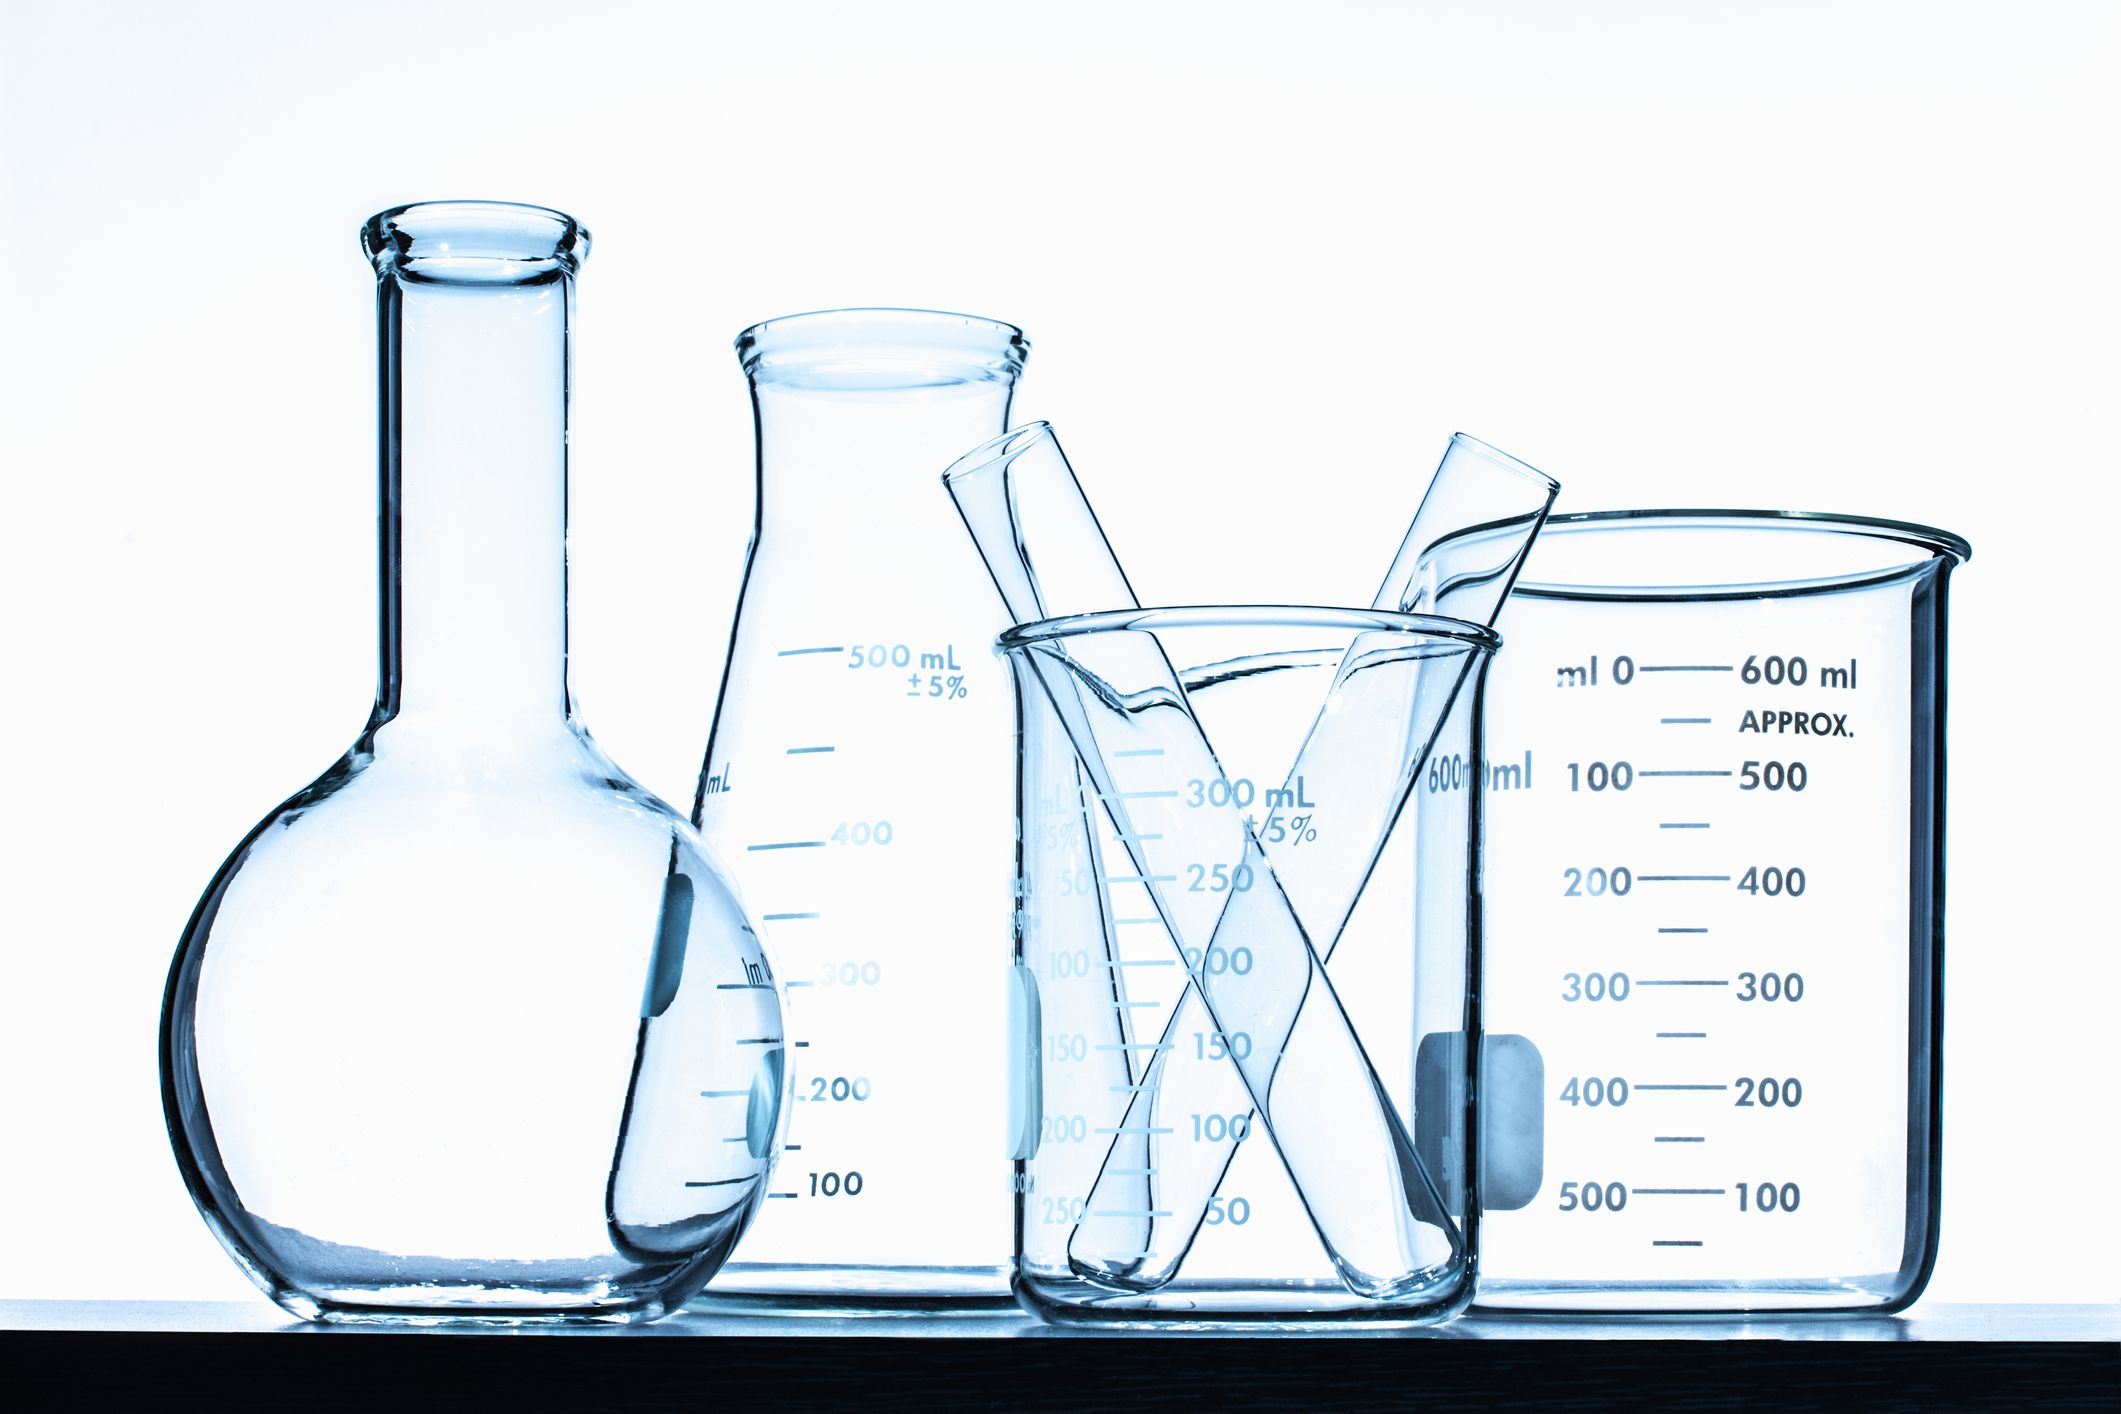 How to Properly Clean Laboratory Glassware